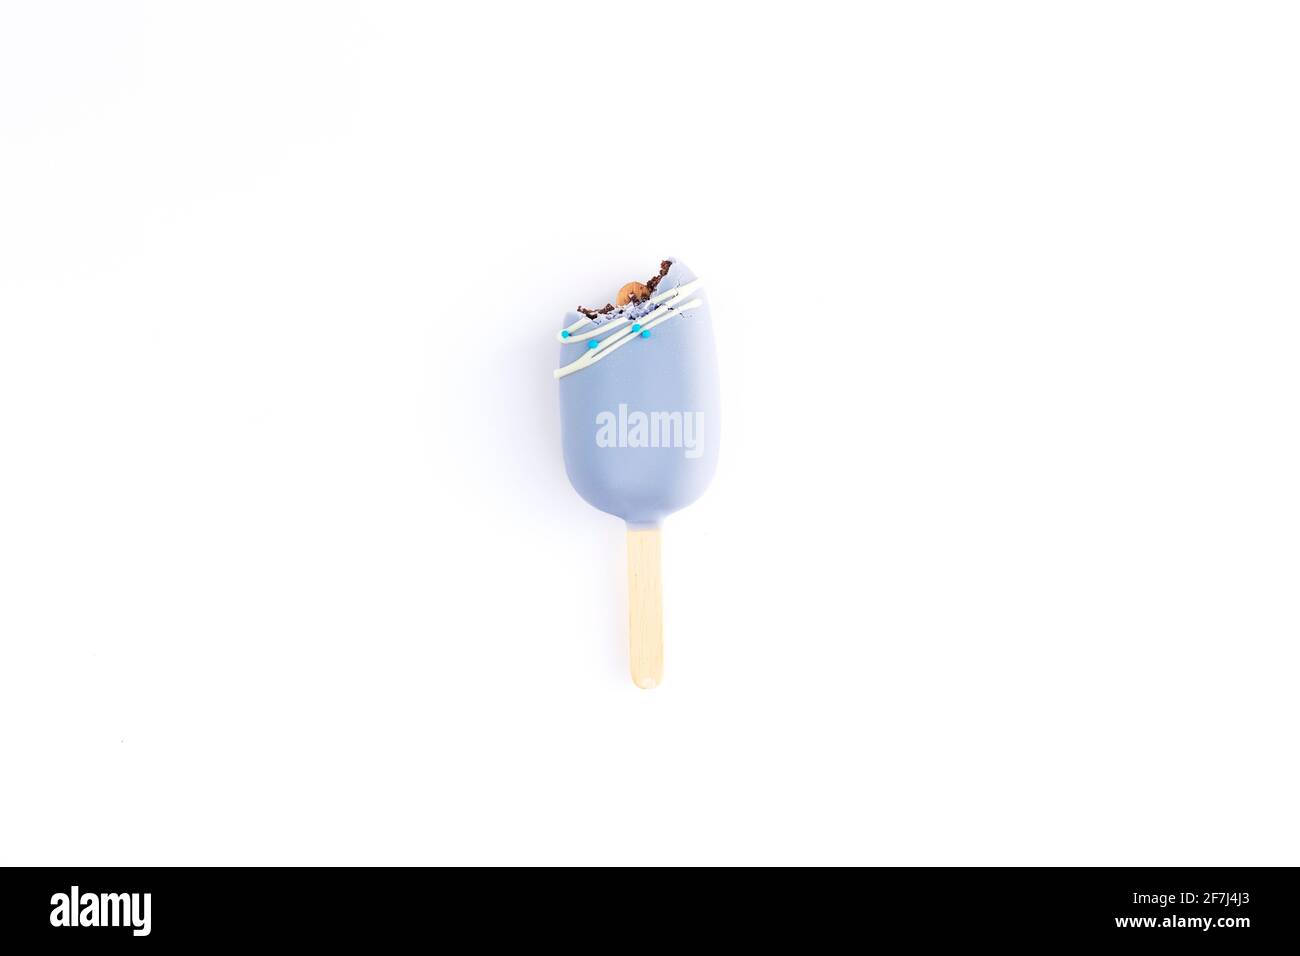 Isolated bitten blue cookie ice cream on a stick on white background. Flat lay with ice cream. Stock Photo